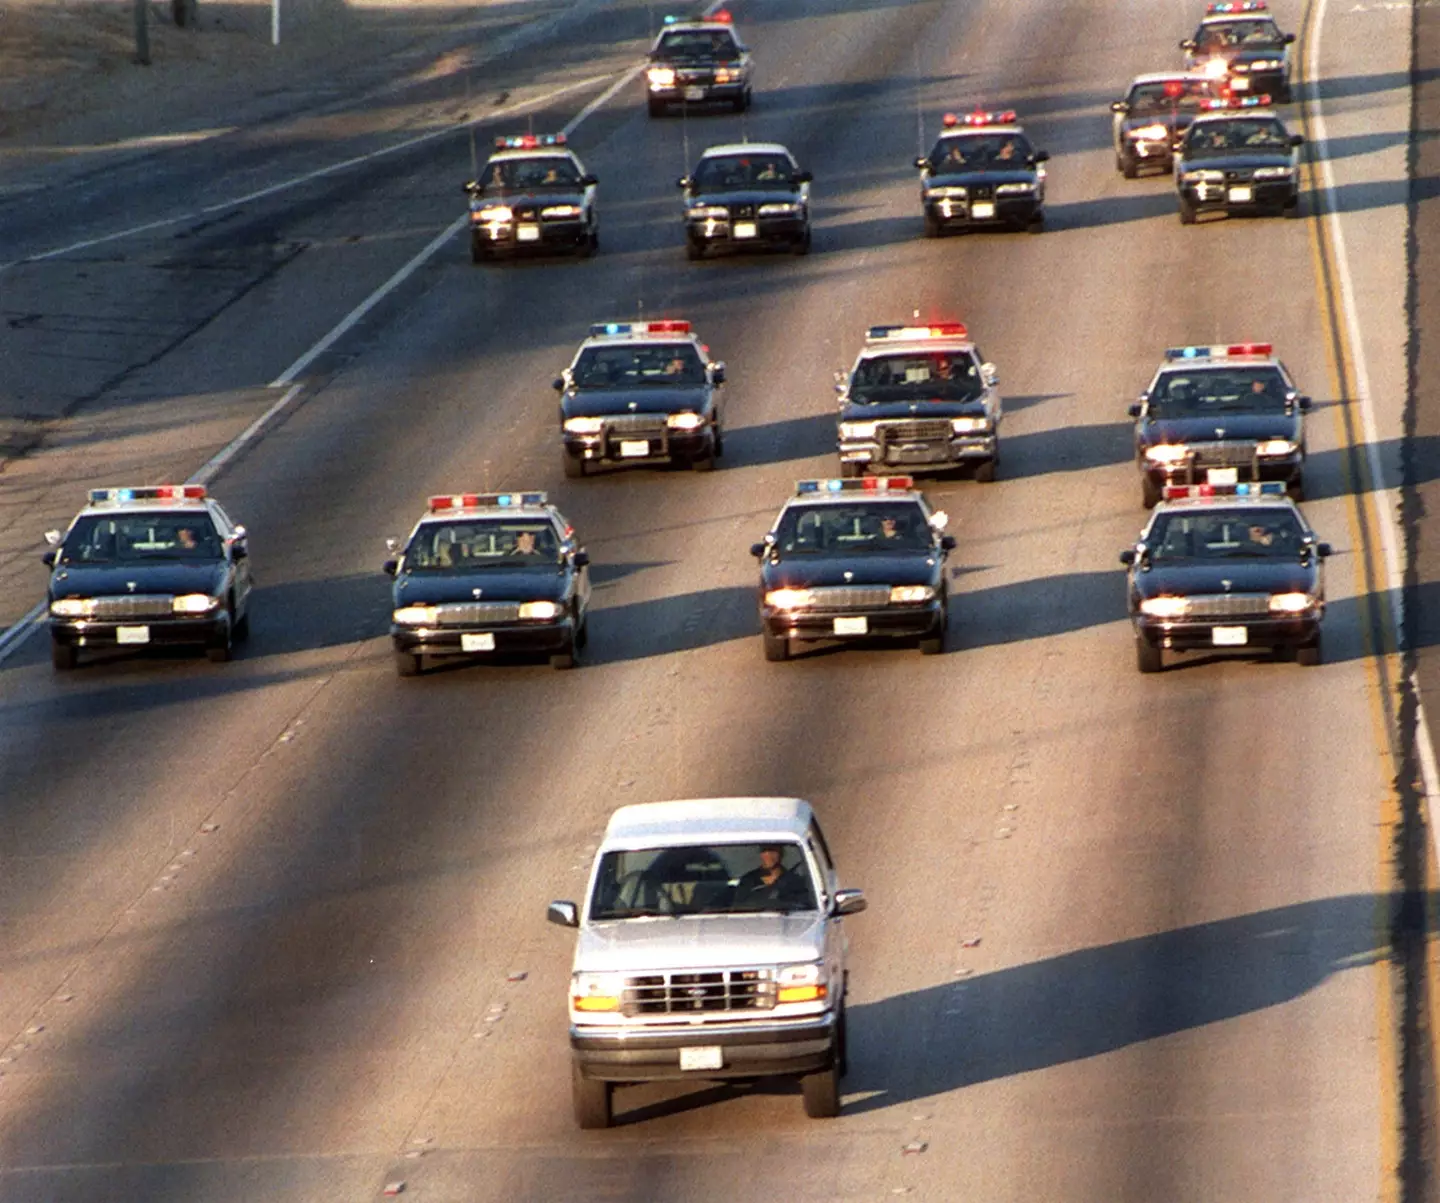 OJ Simpson was infamously arrested after being pursued by patrol cars.